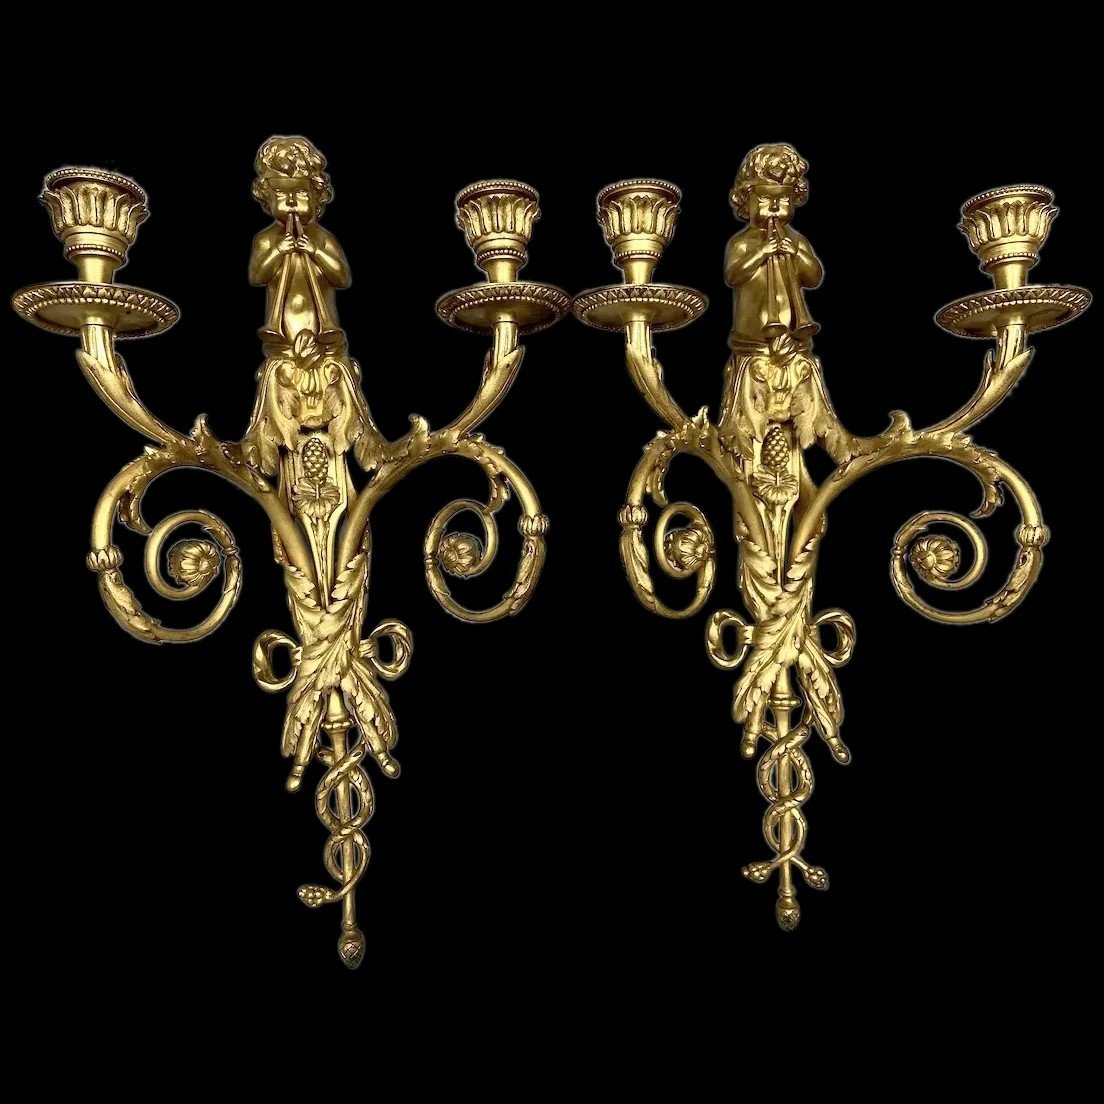 Louis XVI Bronze Wall Sconces From The 1860s - 2 Pieces